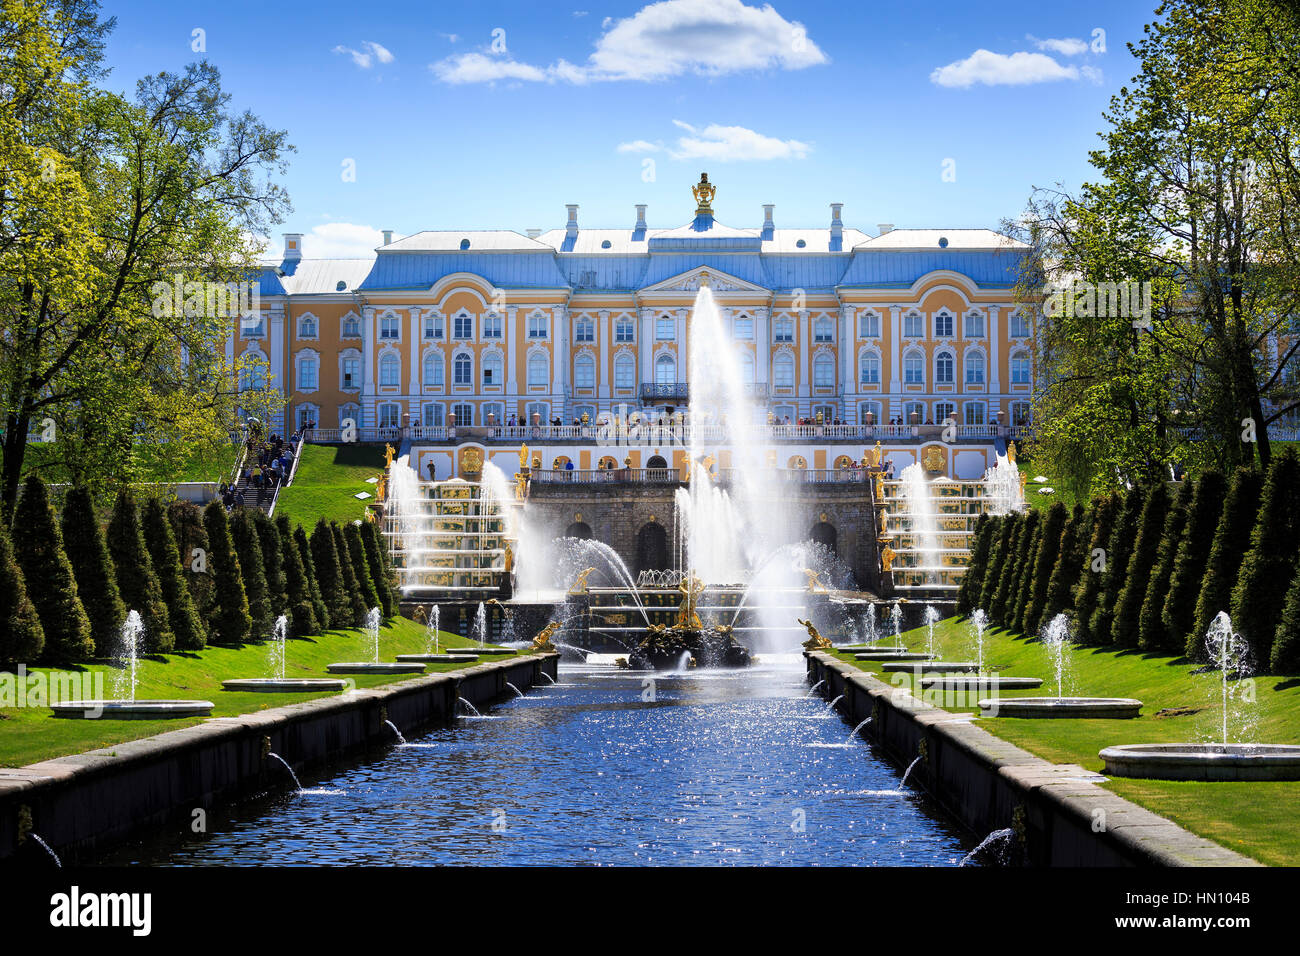 Samson canal and fountains with the grand palace, Peterhof, St Petersburg, Russia Stock Photo